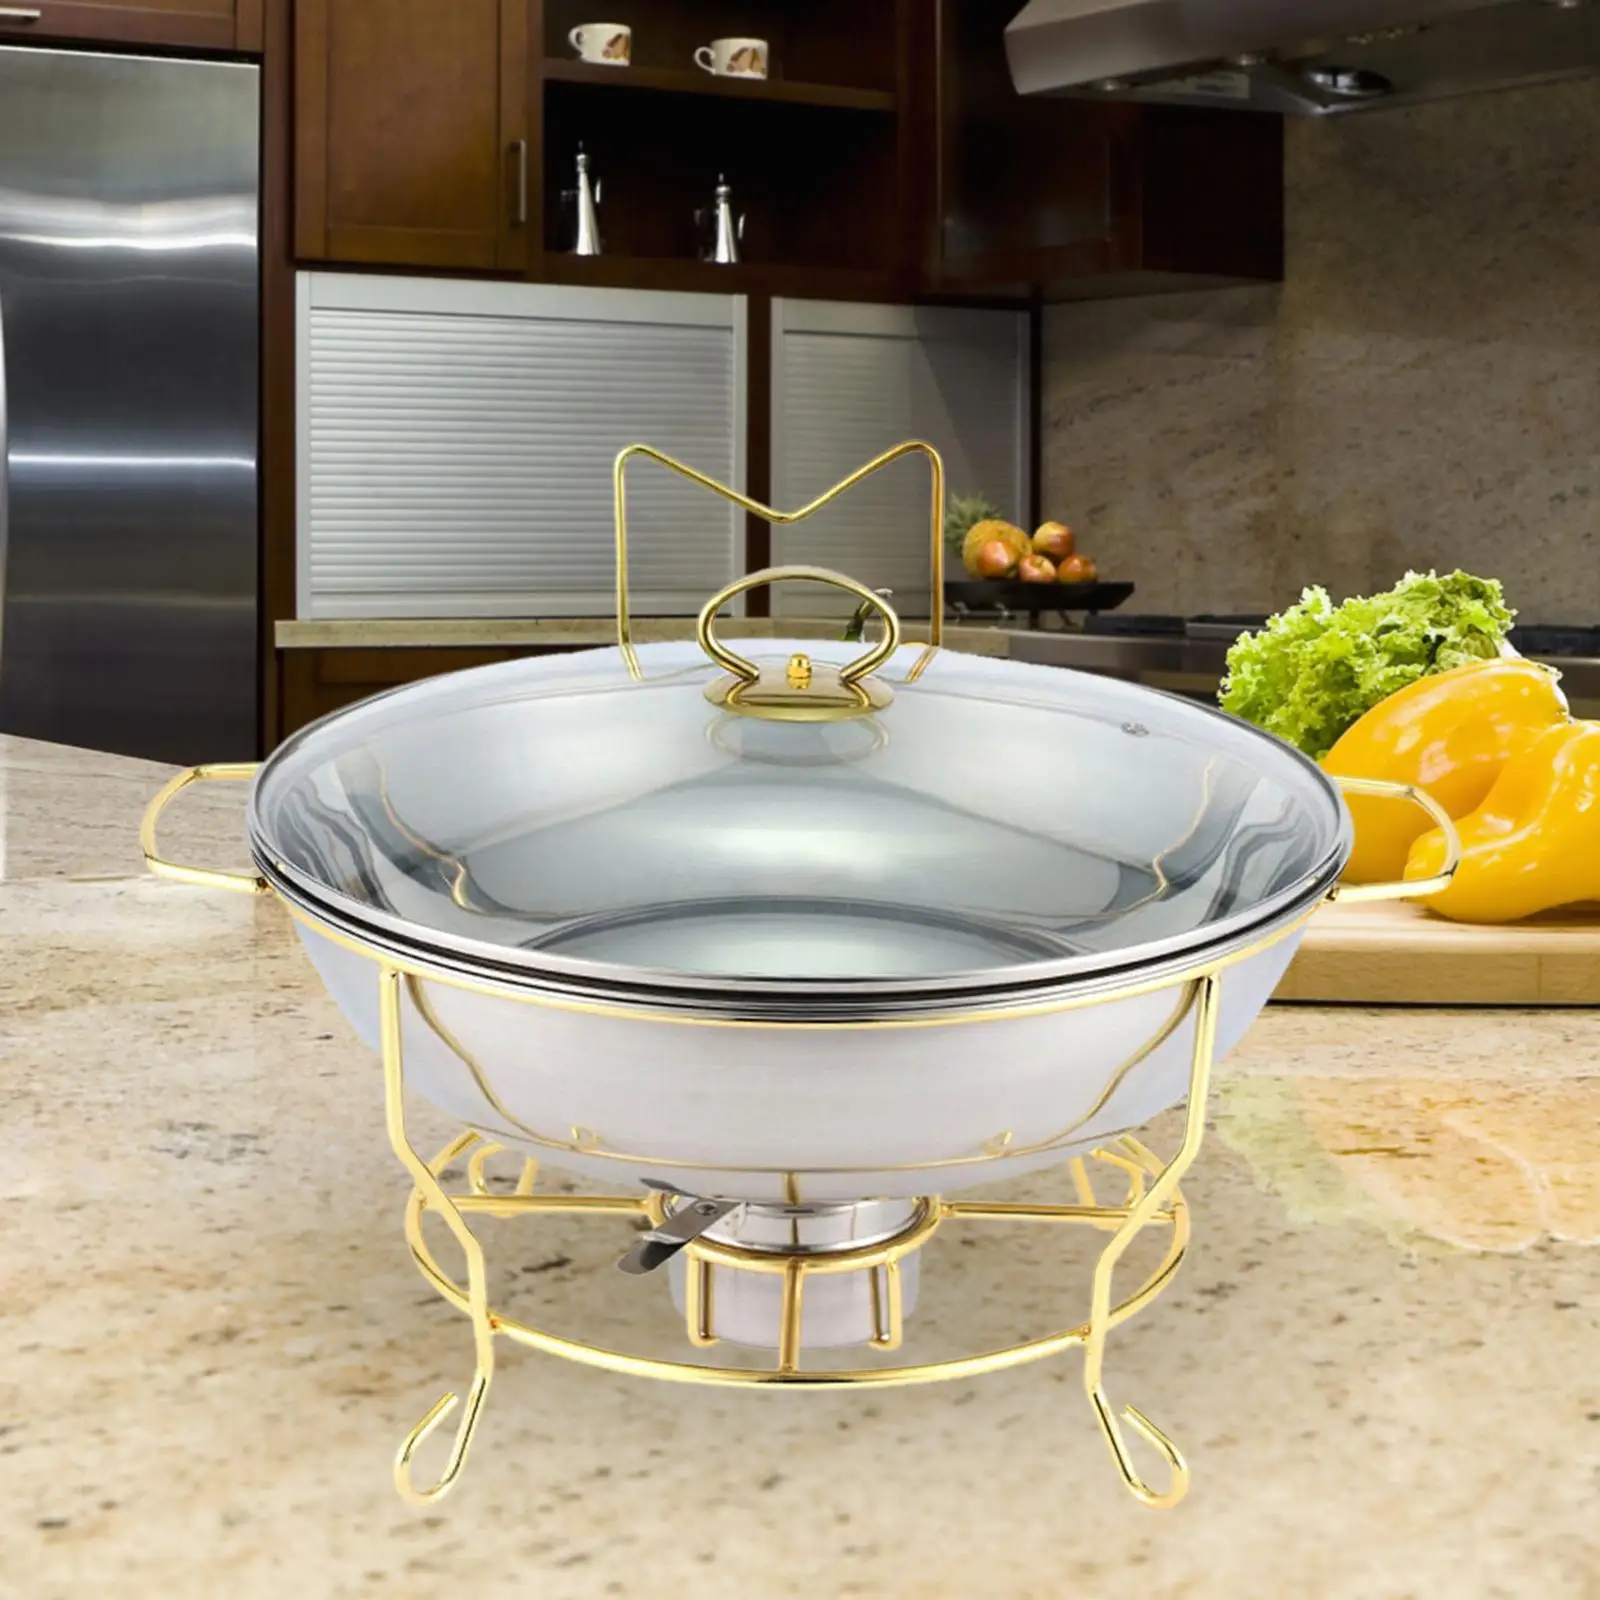 Stainless Steel Buffet Catering Warmer 3.7 Quart Capacity with Fuel Holder for Catering